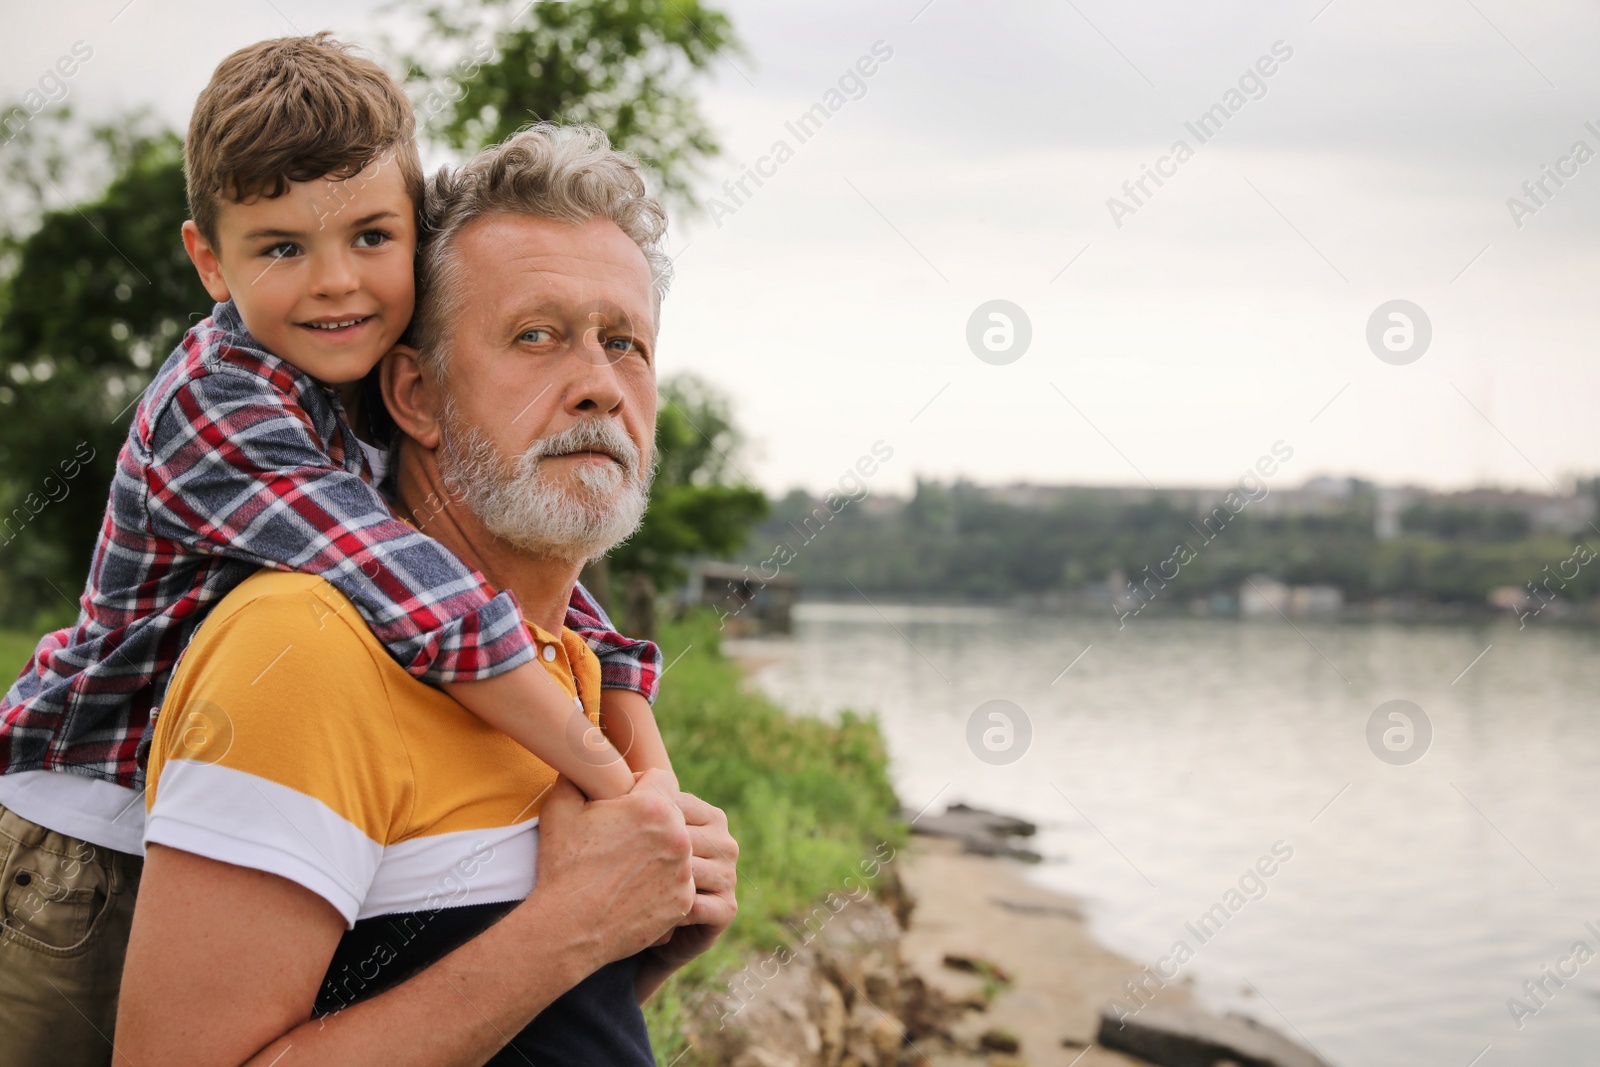 Photo of Cute little boy and grandfather spending time together near river, space for text